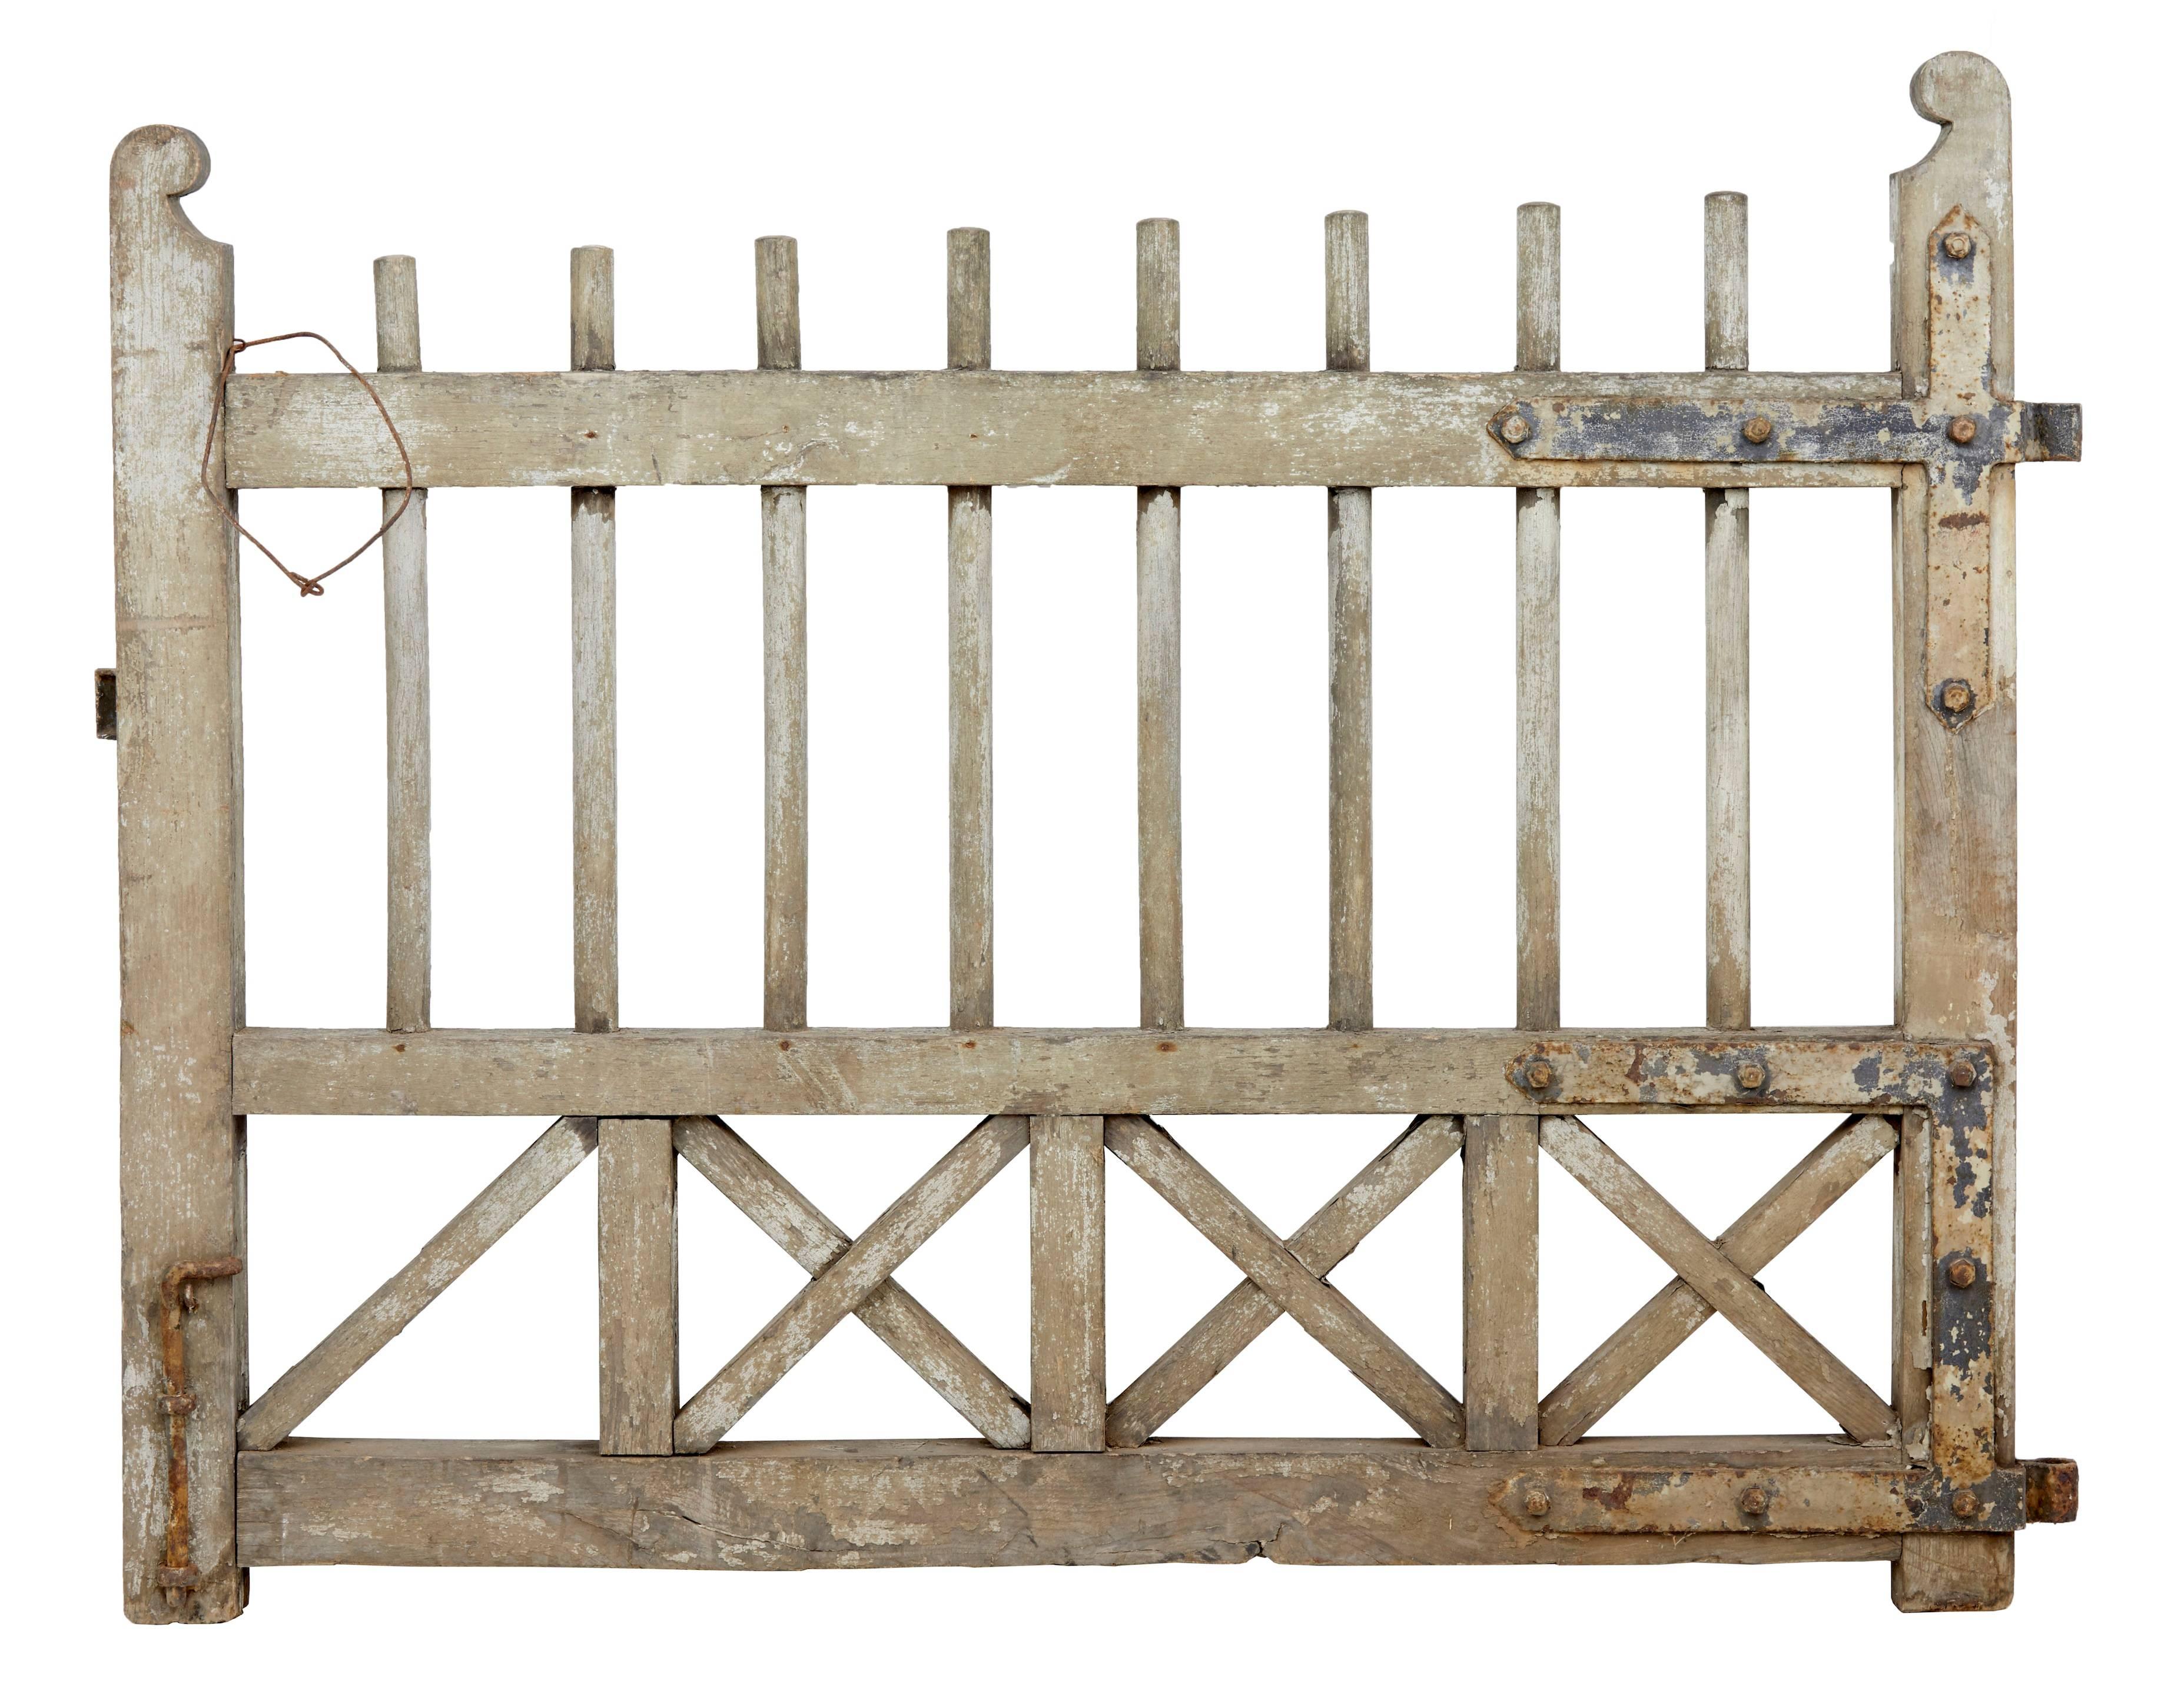 Fine pair of rustic Swedish gates, circa 1890.
In original as sourced condition.
Evidence of original paint and complete with original iron work.
We have presented these with the losses that we found them with but all the parts missing are